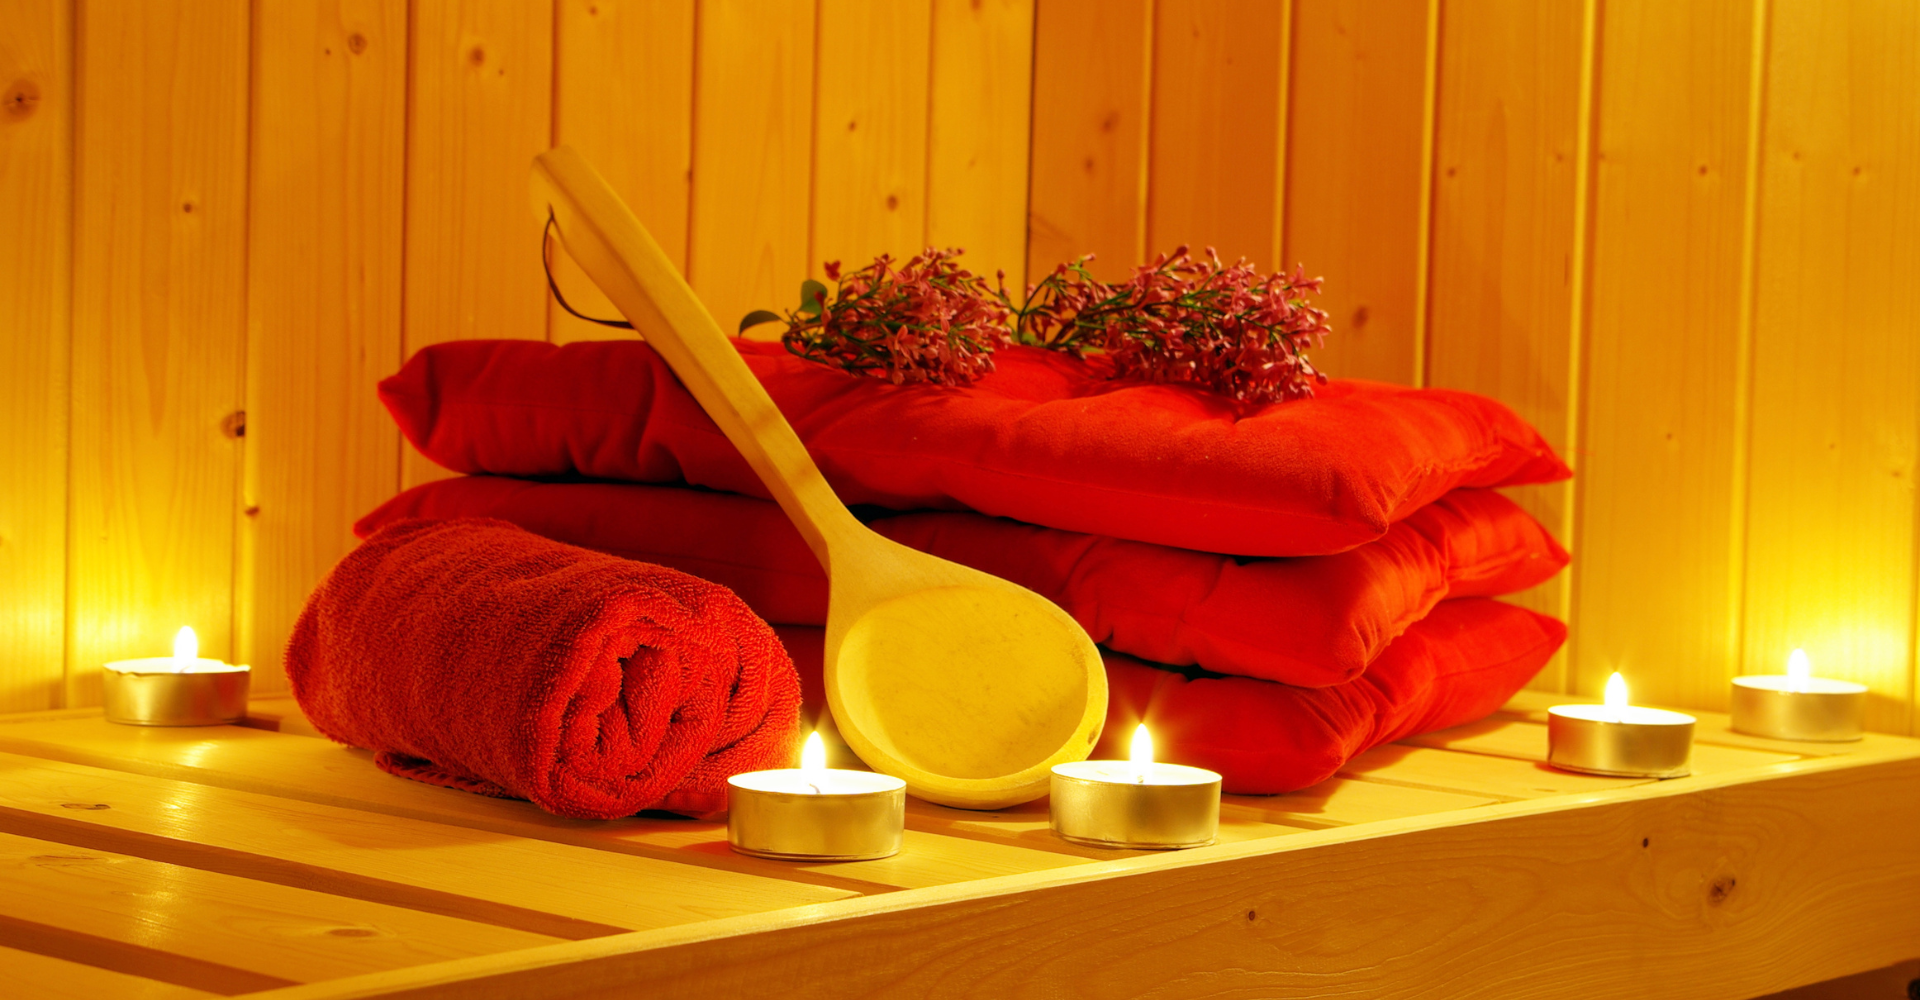 How Long Should You Stay in an Infrared Sauna?